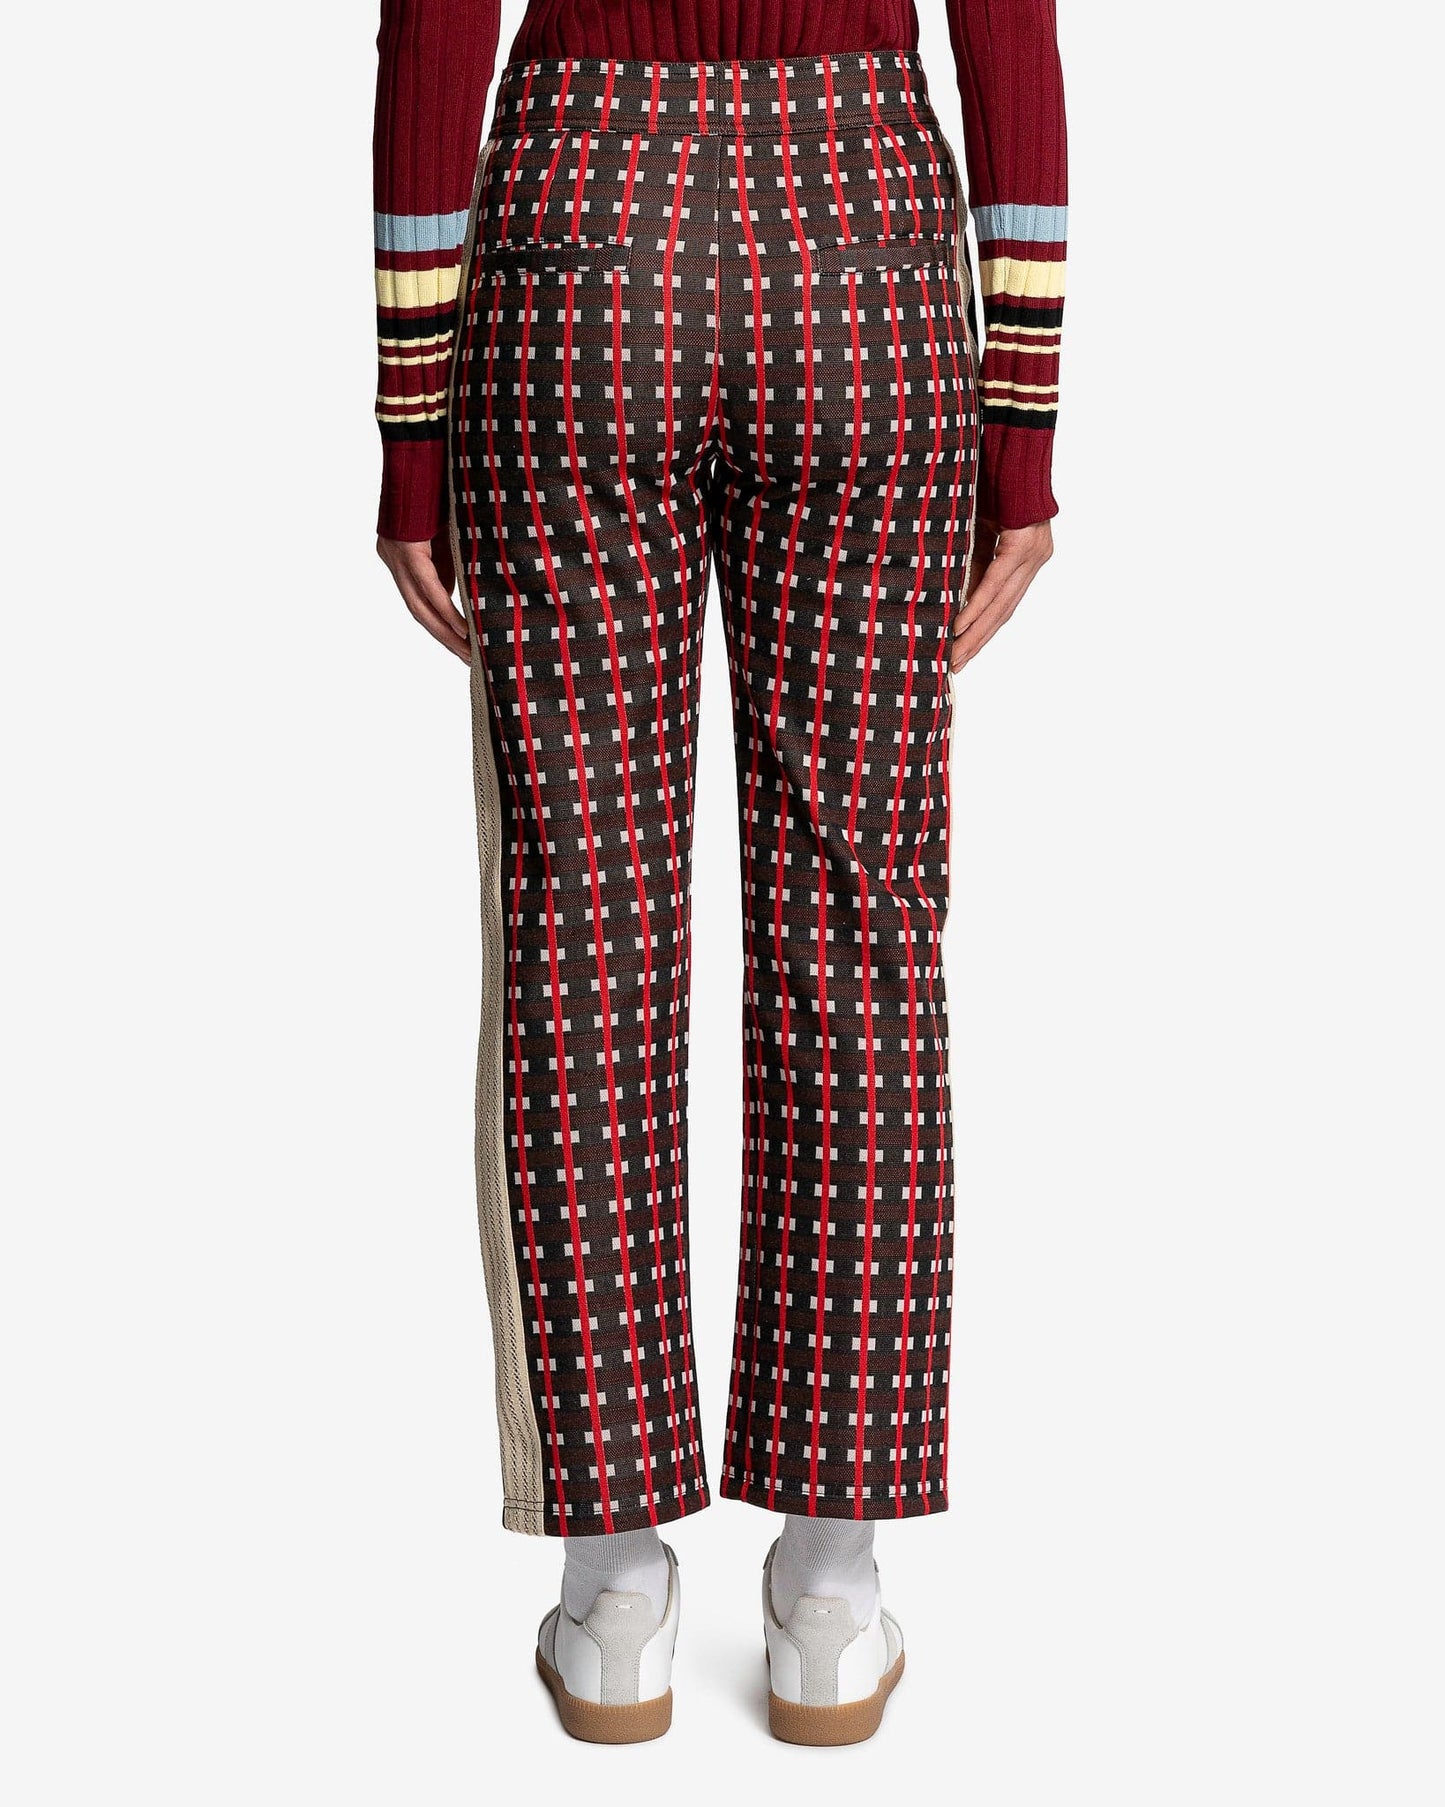 Wales Bonner Women Pants Power Trackpant in Brown/Red